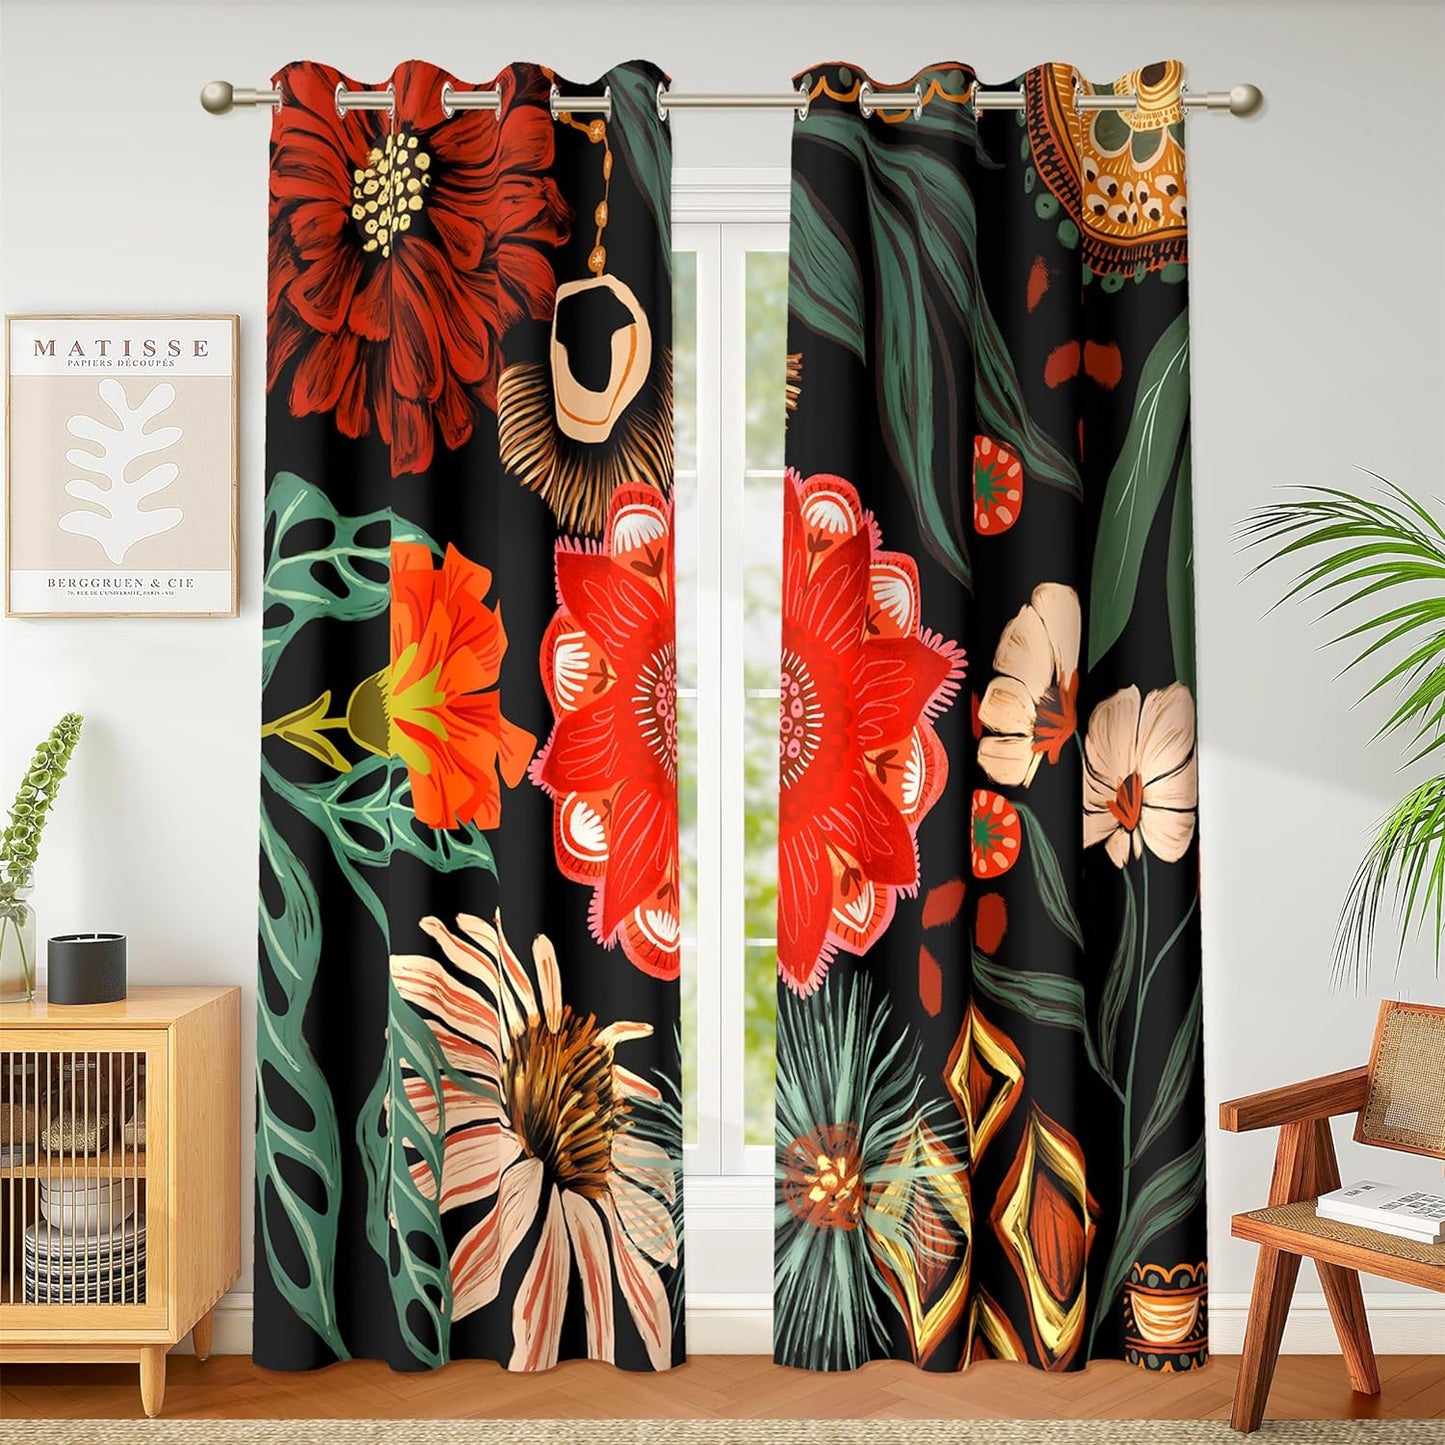 Boho Floral 100% Blackout Curtains for Living Room 96 Inch Long 2 Panels Mid Century Botanical Black Out Curtains for Bedroom Grommet Thermal Insulated Room Darkening Window Drapes,52Wx96L  Tyrot Black Boho Floral Print 52W X 72L Inch X 2 Panels 